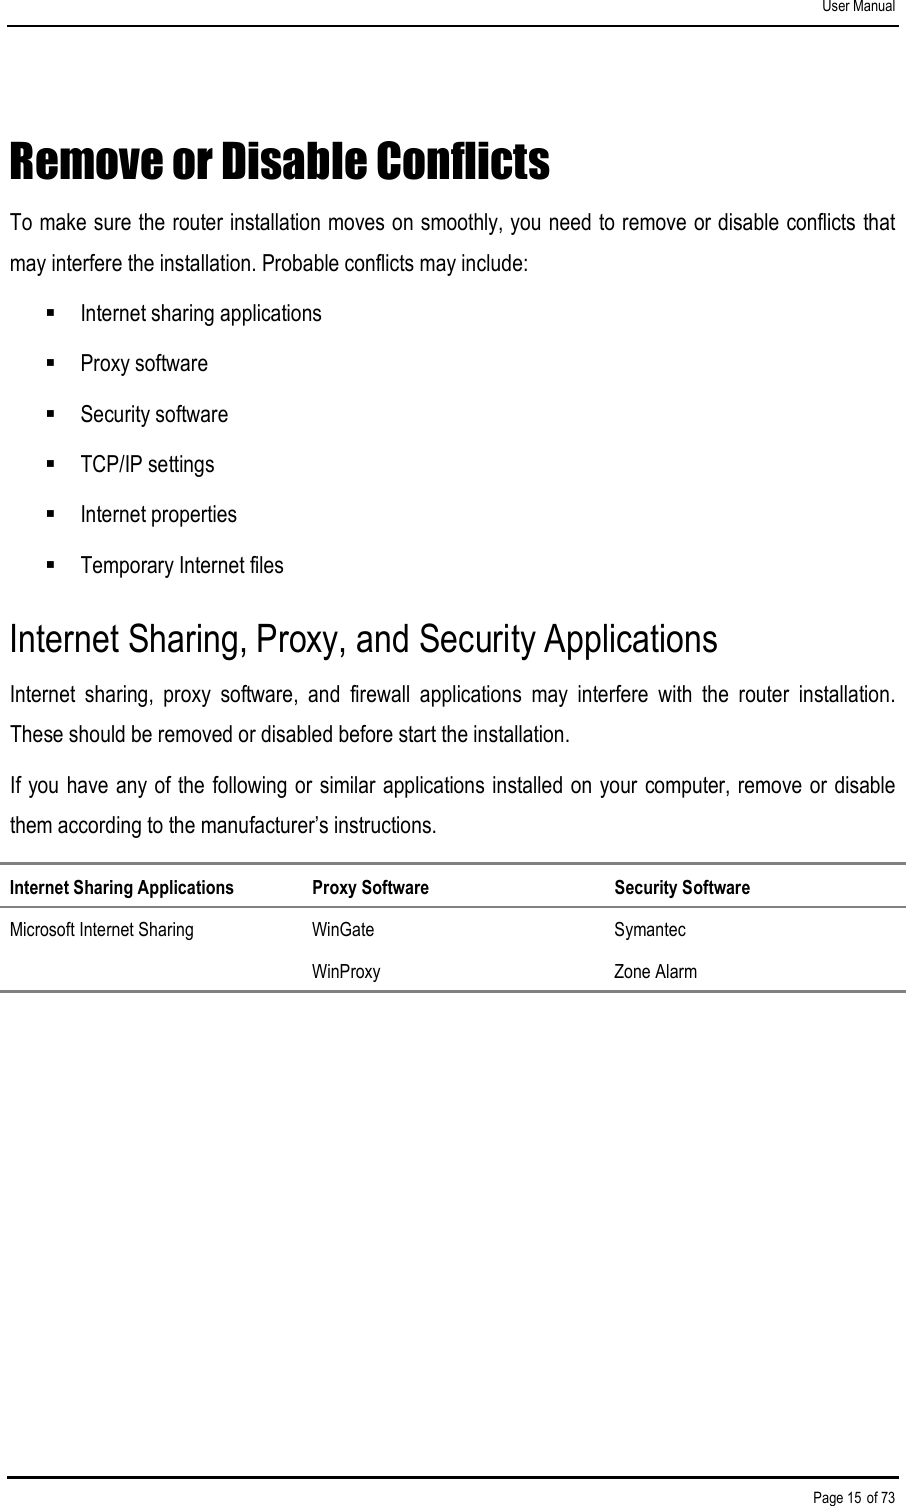 User Manual Page 15 of 73 Remove or Disable Conflicts To make sure the router installation moves on smoothly, you need to remove or disable conflicts that may interfere the installation. Probable conflicts may include:  Internet sharing applications  Proxy software  Security software  TCP/IP settings  Internet properties  Temporary Internet files Internet Sharing, Proxy, and Security Applications Internet  sharing,  proxy  software,  and  firewall  applications  may  interfere  with  the  router  installation. These should be removed or disabled before start the installation. If you have any of the following or similar applications installed on your computer, remove or disable them according to the manufacturer’s instructions. Internet Sharing Applications  Proxy Software  Security Software Microsoft Internet Sharing  WinGate  Symantec   WinProxy  Zone Alarm  